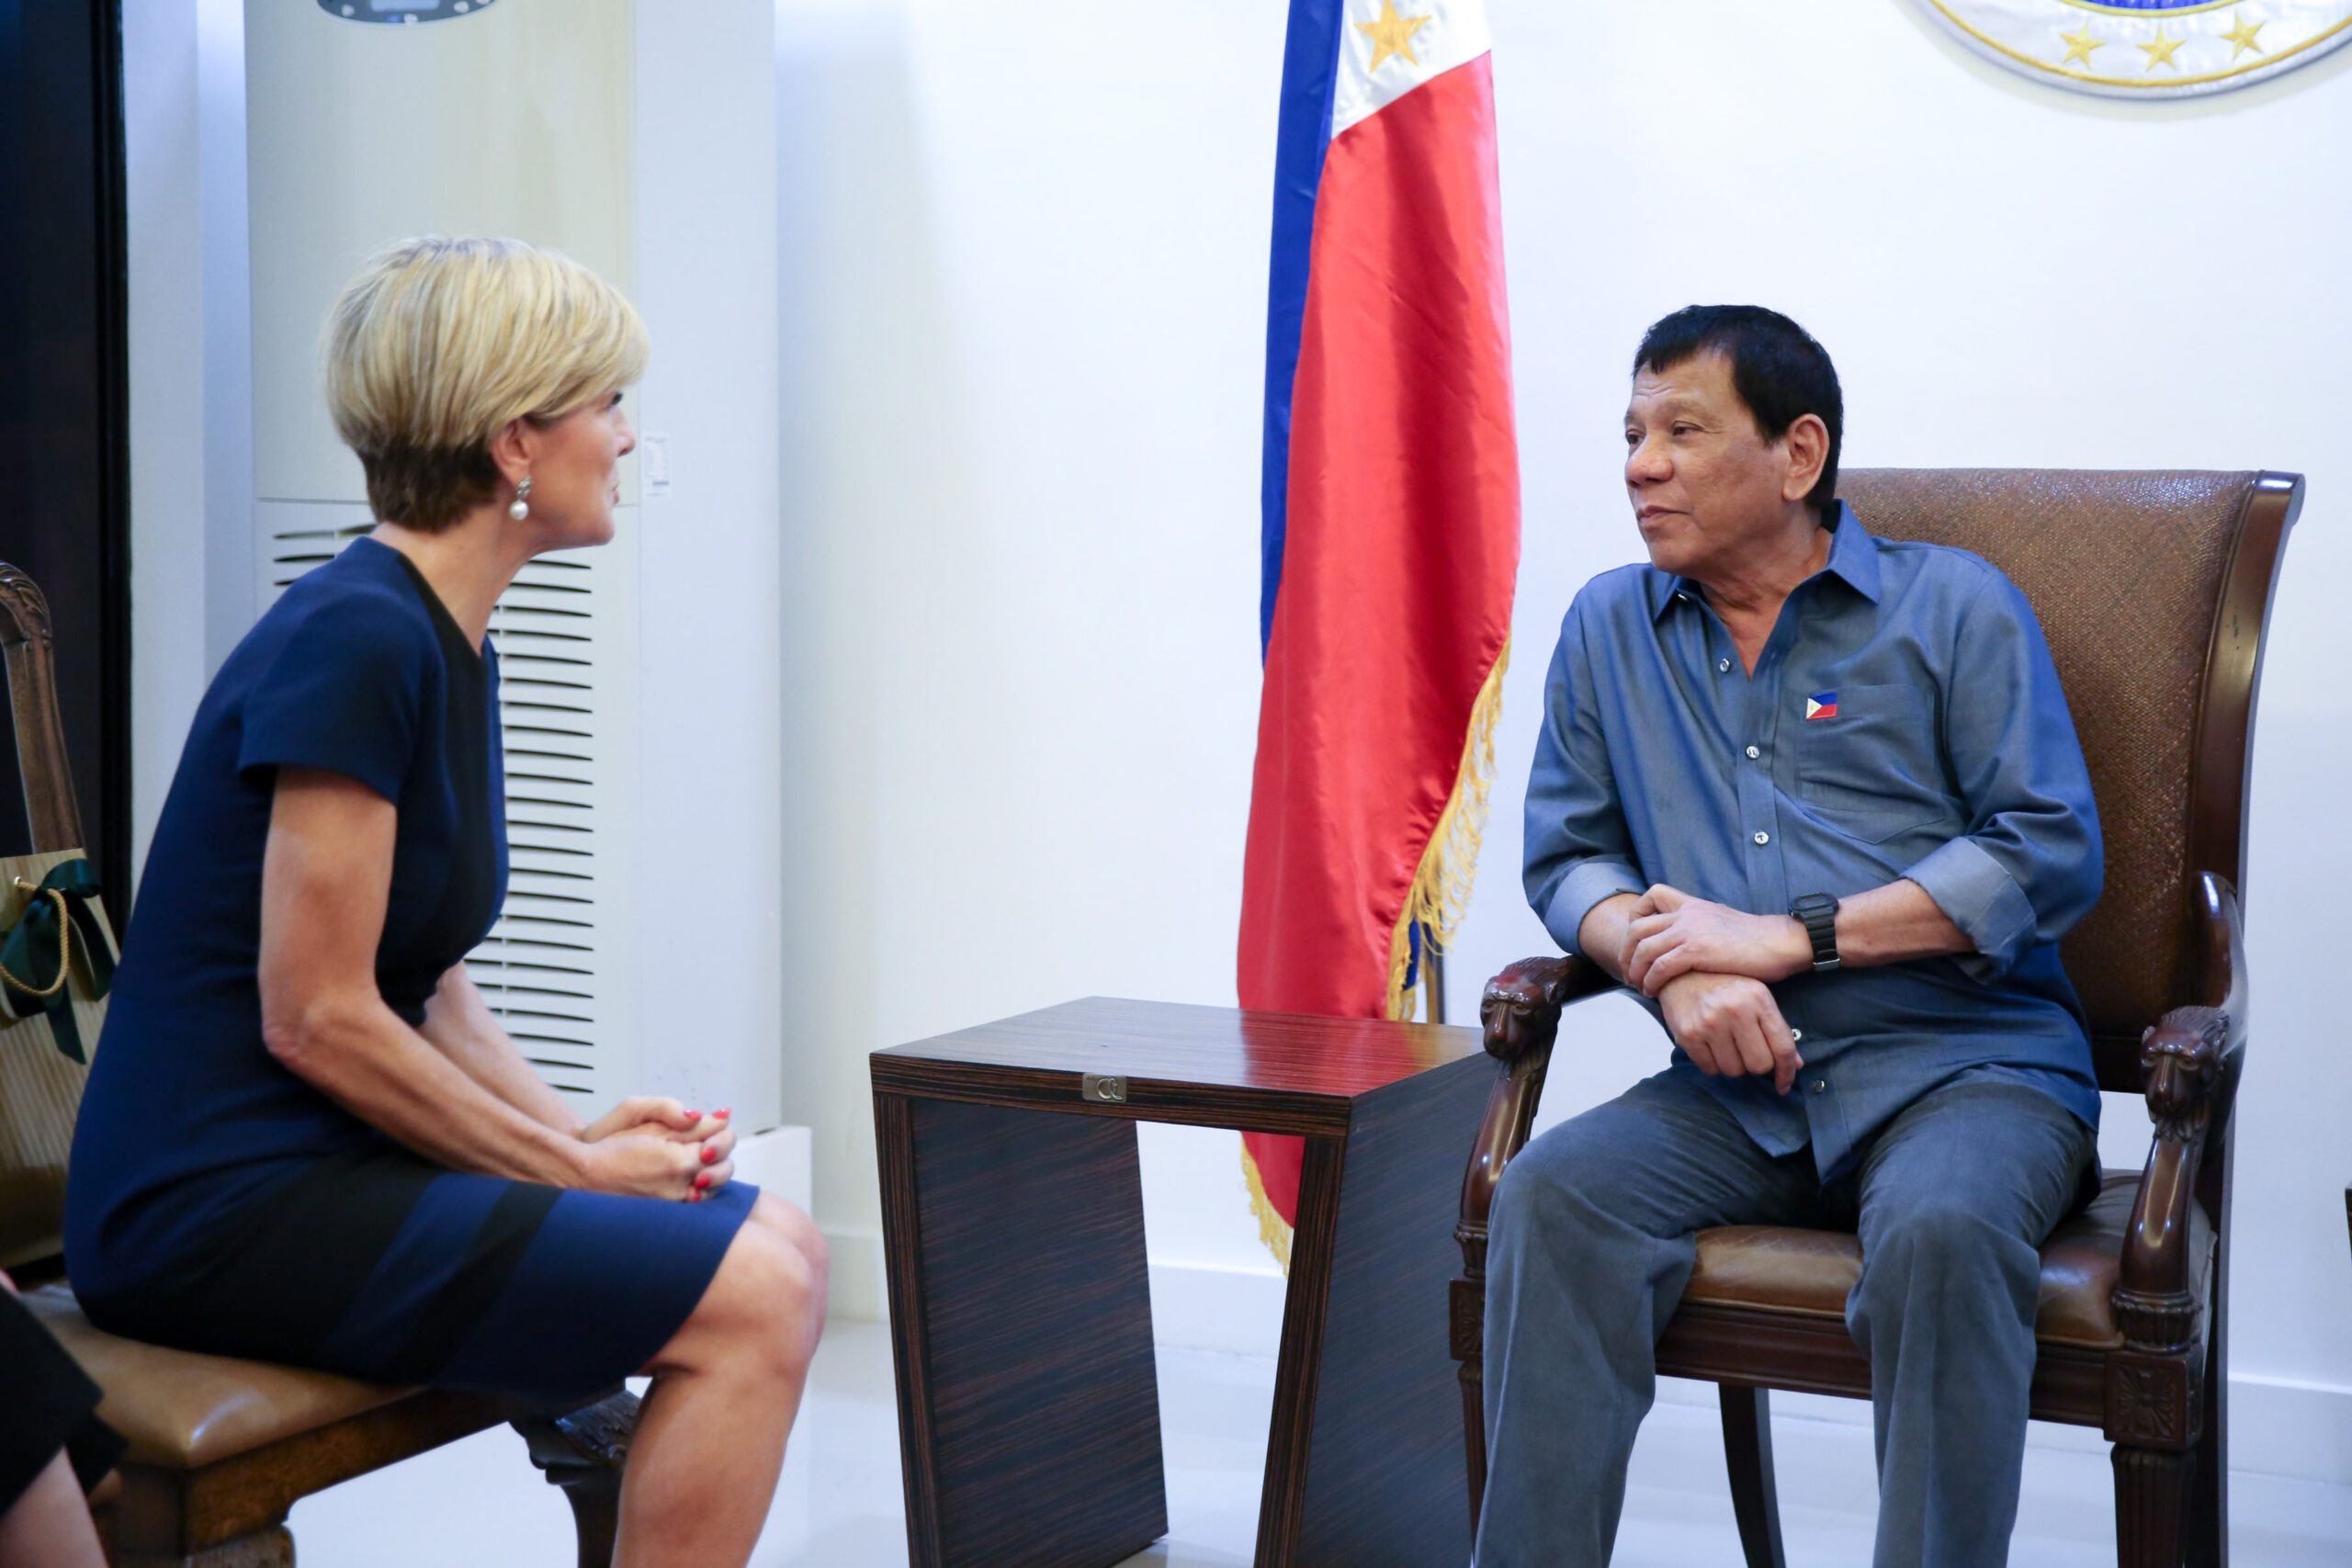 Australia vs Duterte? ‘Just difference in perspective,’ Abella says